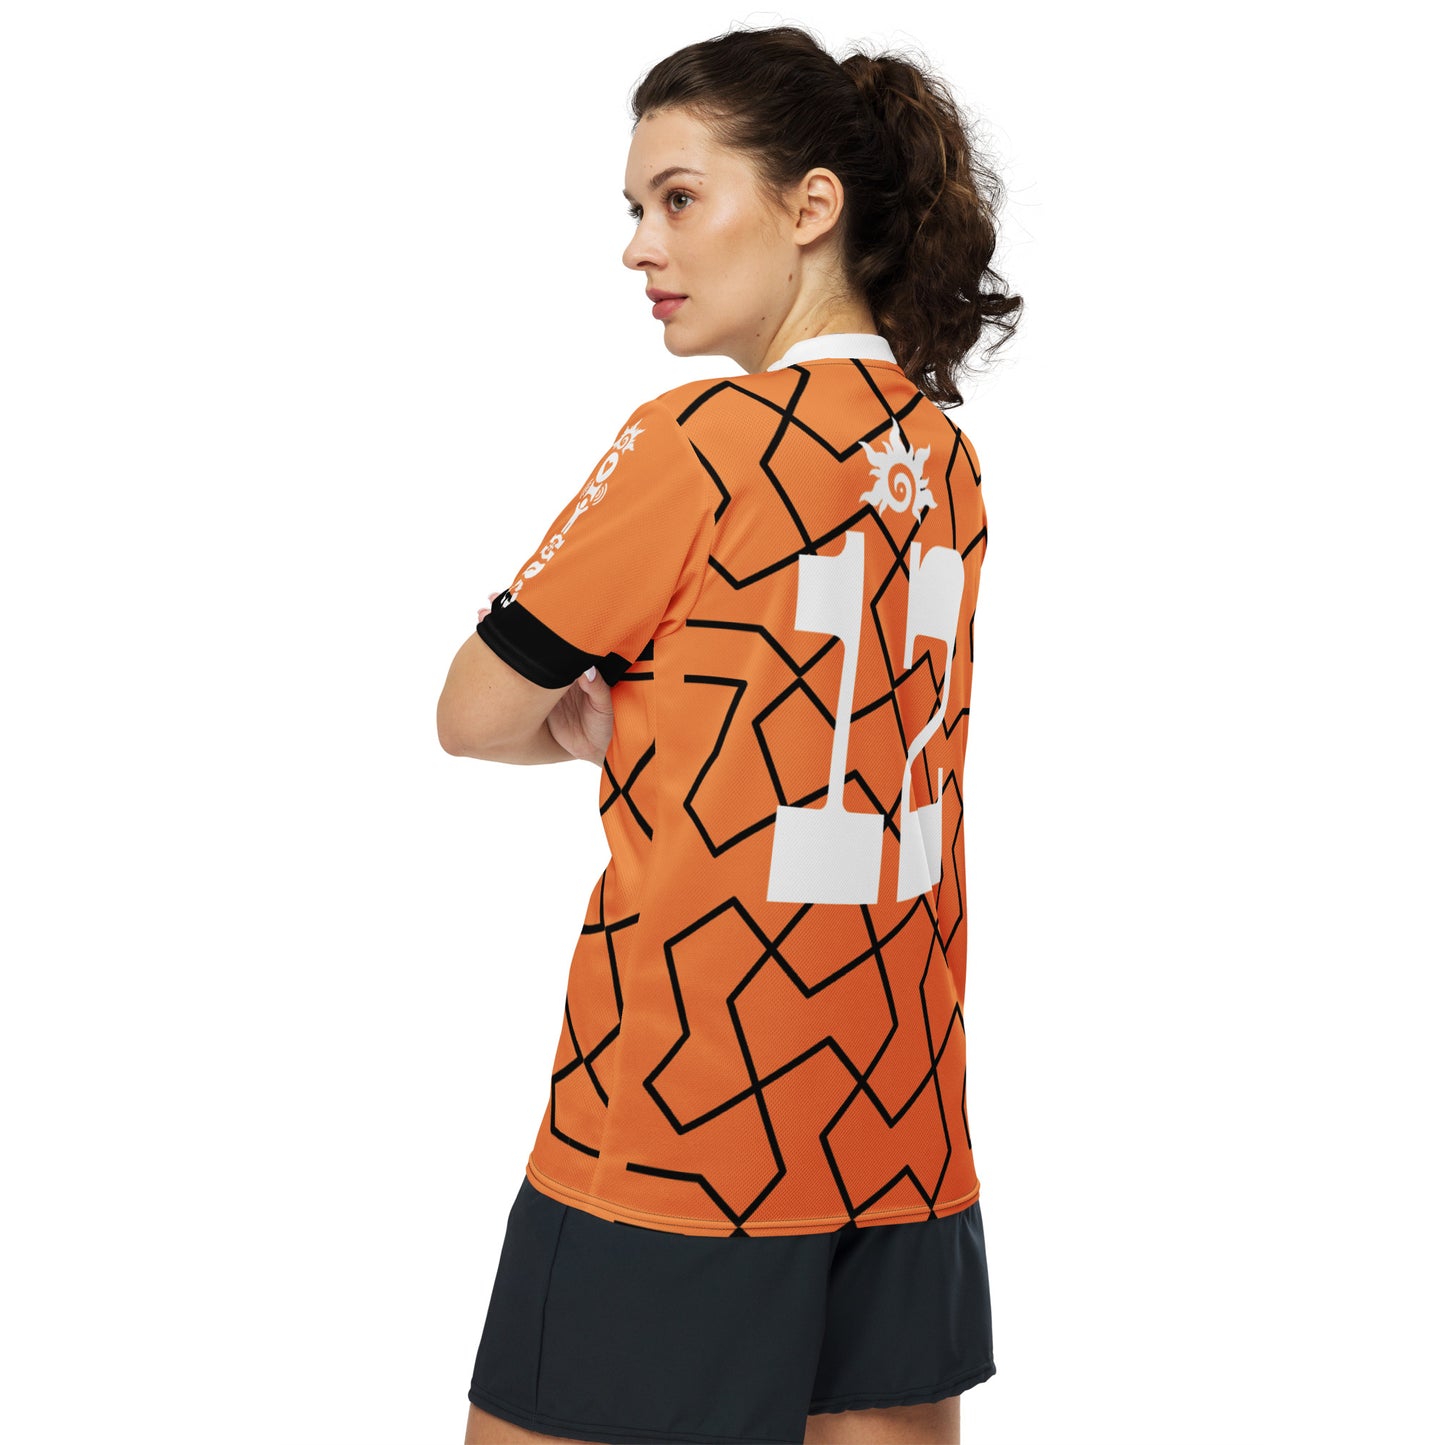 Recycled Unisex Sports Jersey ActSun 13